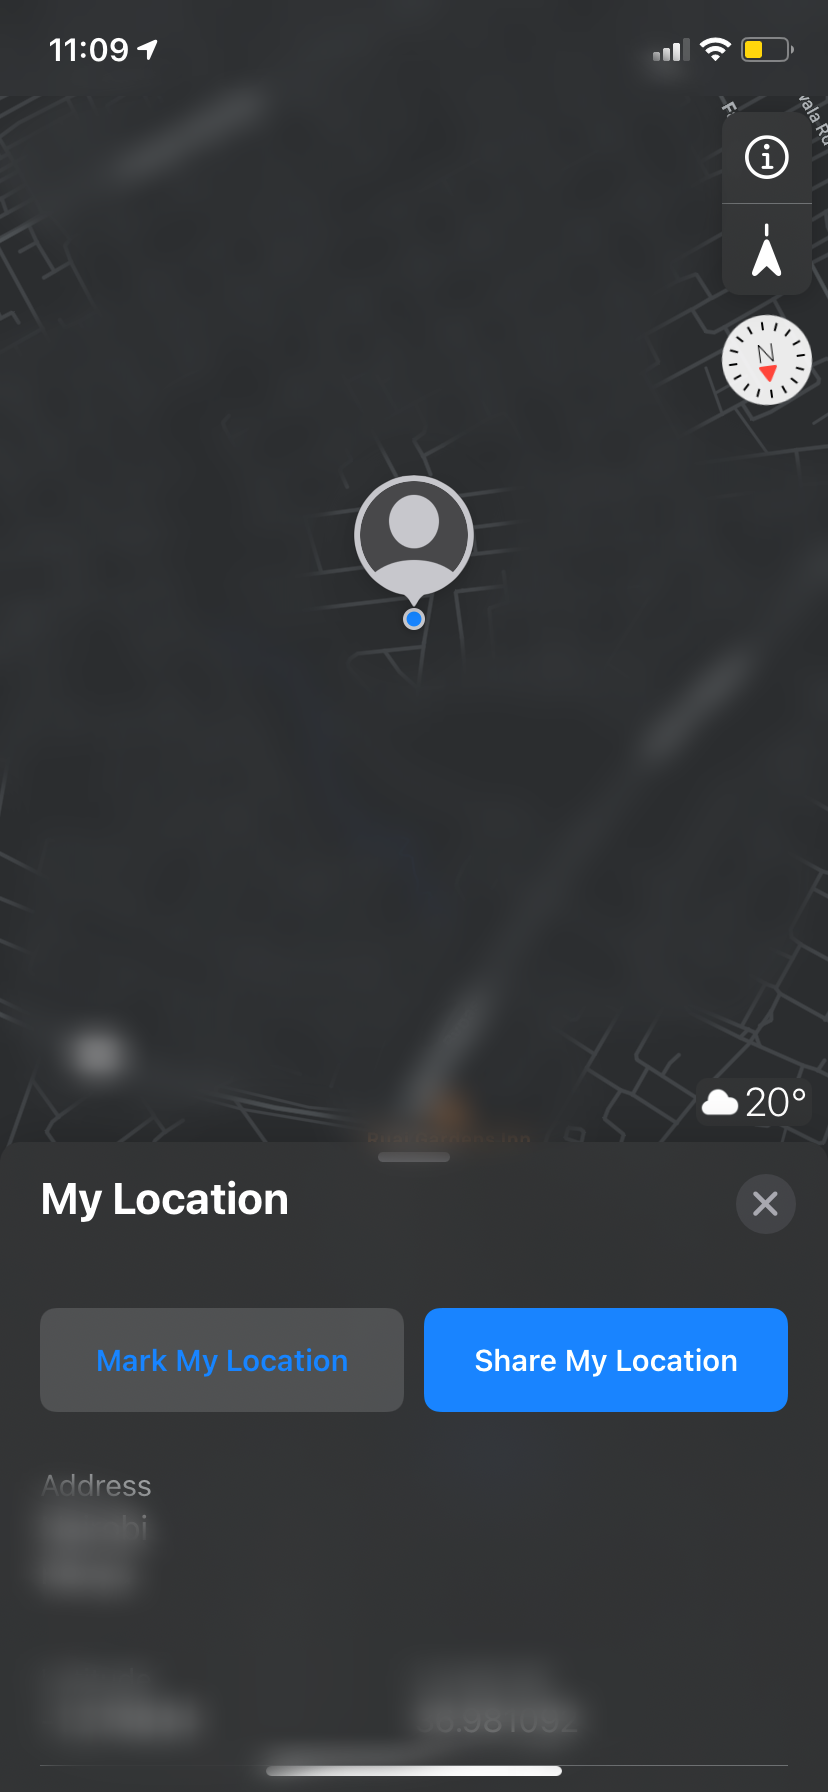 Sharing your location on iPhone via Apple Maps